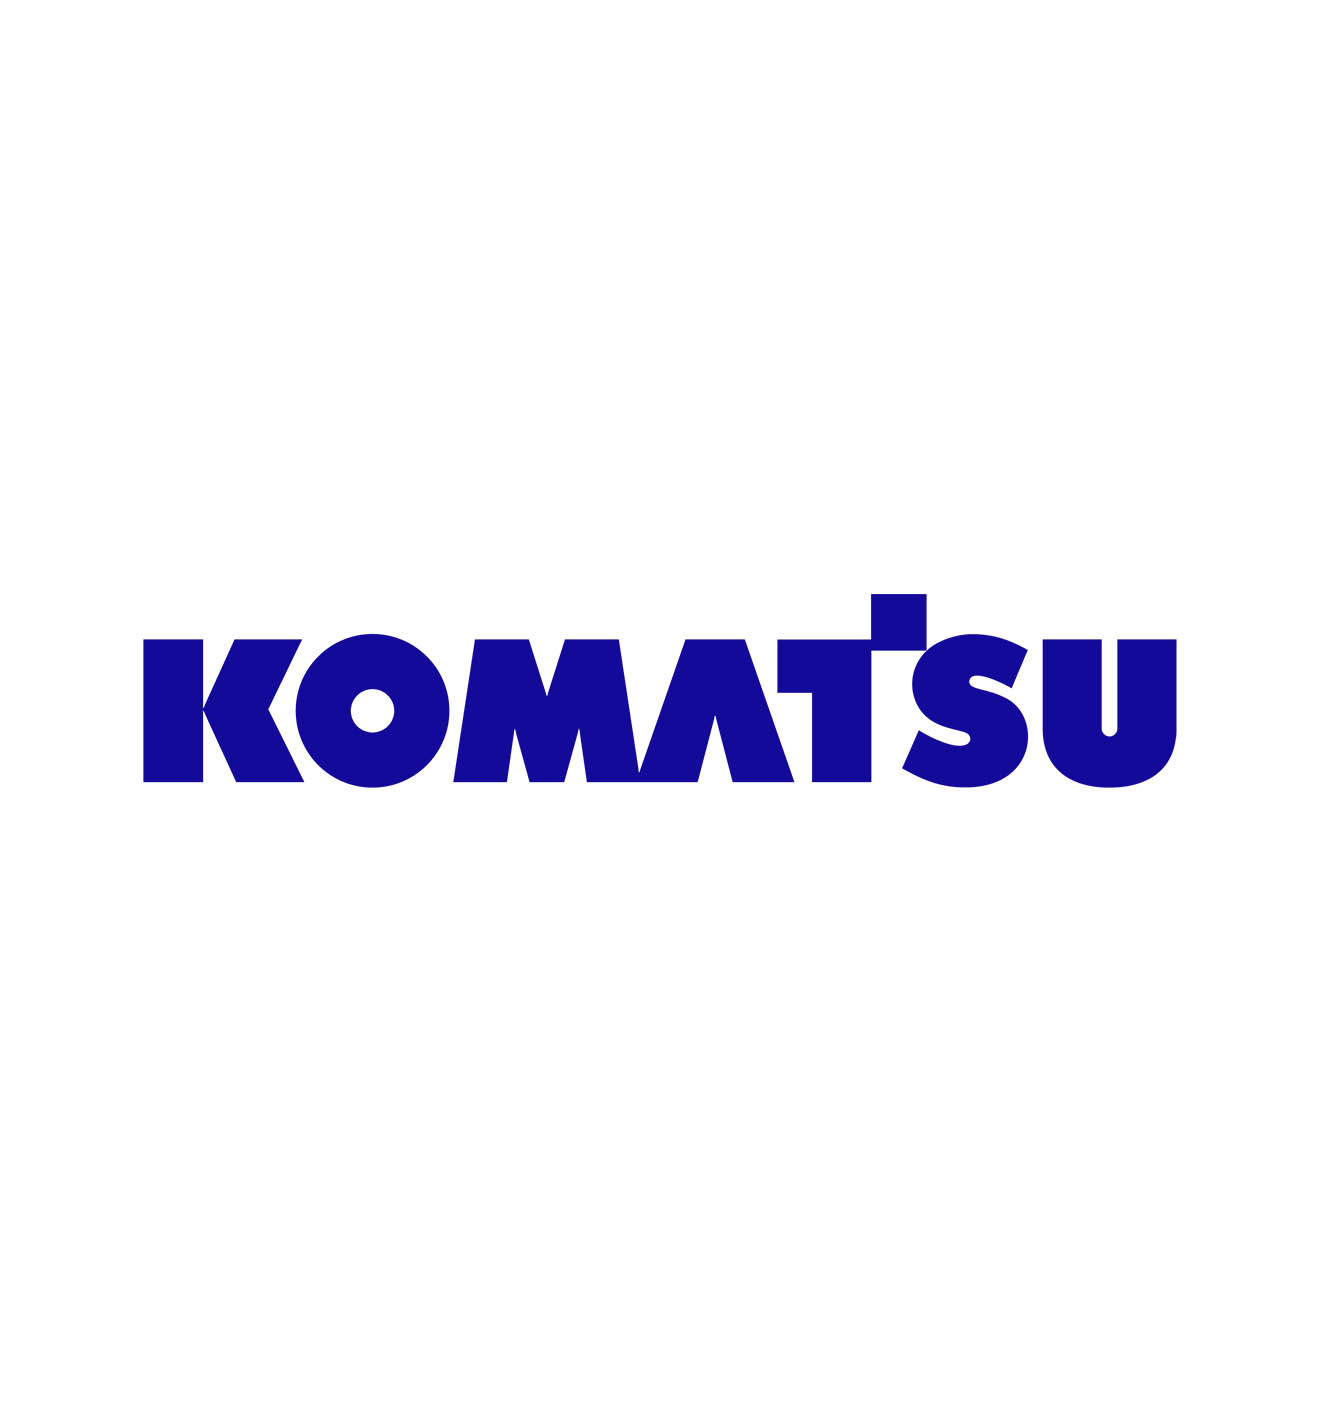 Komatsu to provide assistance for people affected by the Moroccan earthquakes and flooding in Libya